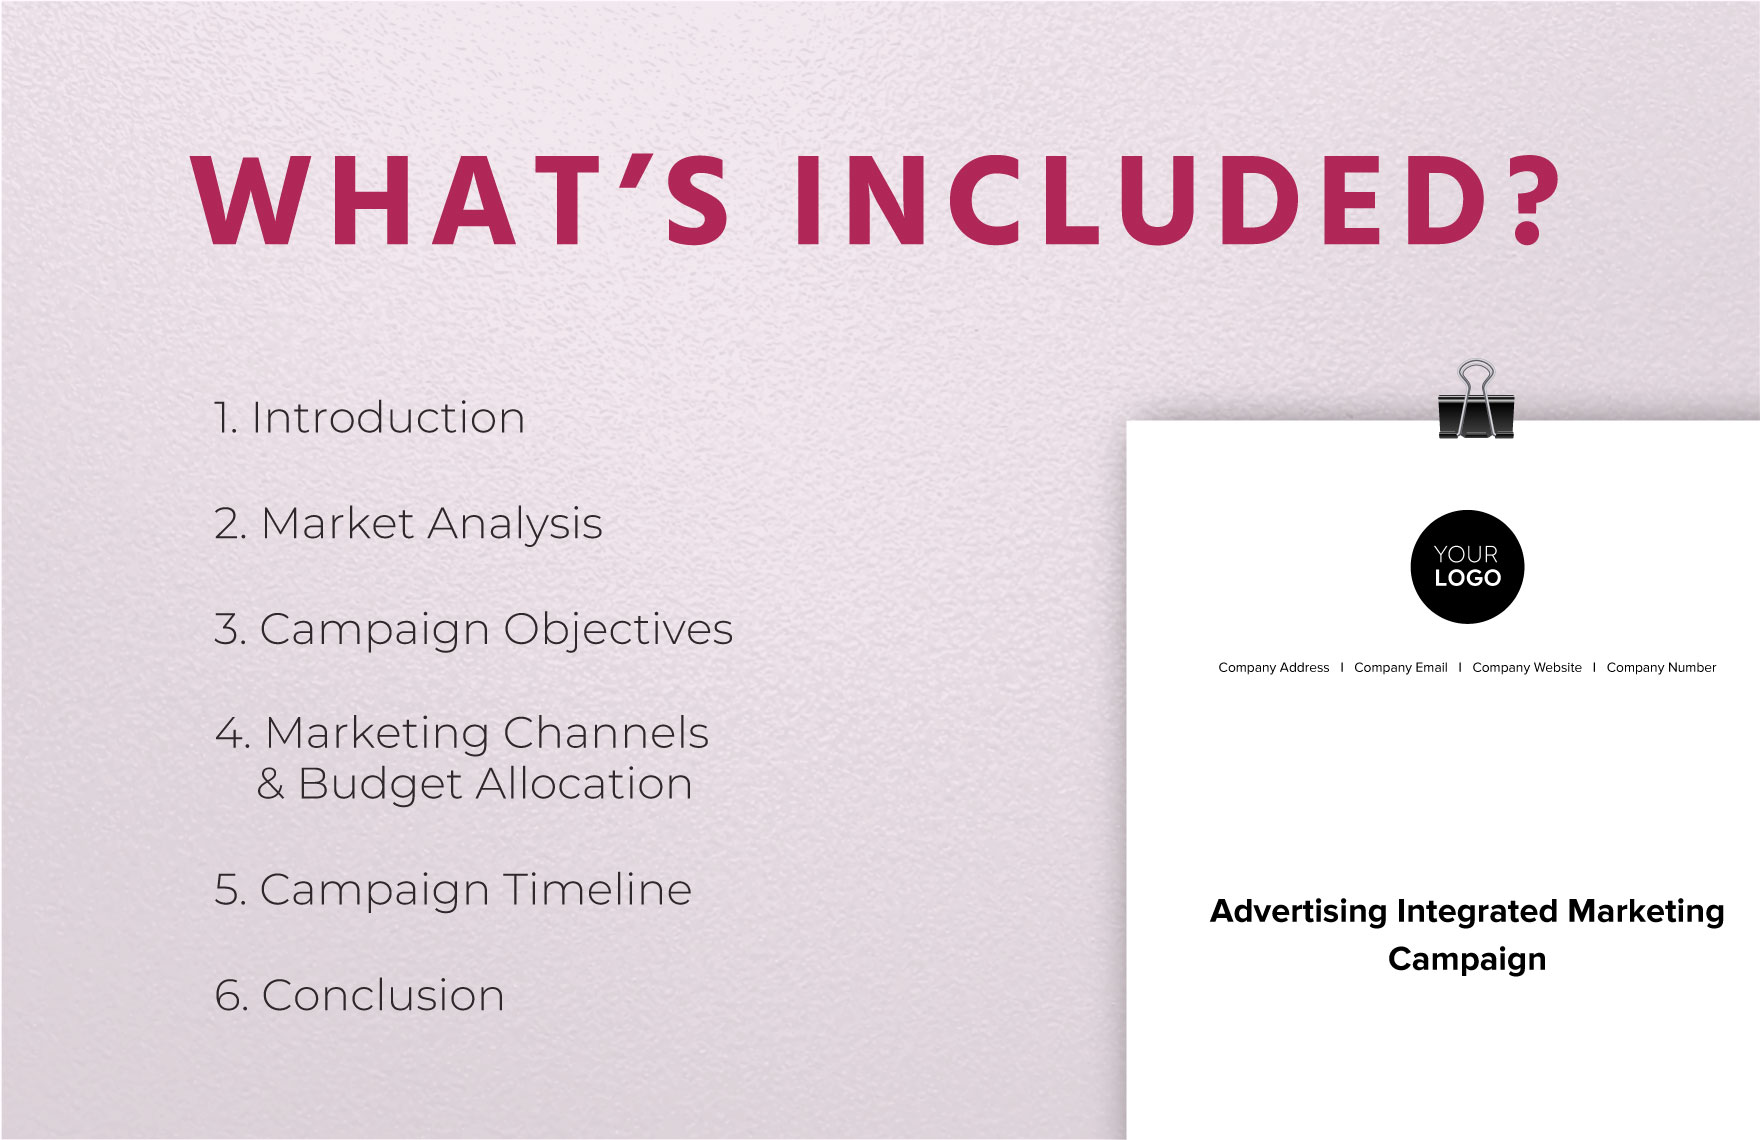 Advertising Integrated Marketing Campaign Template